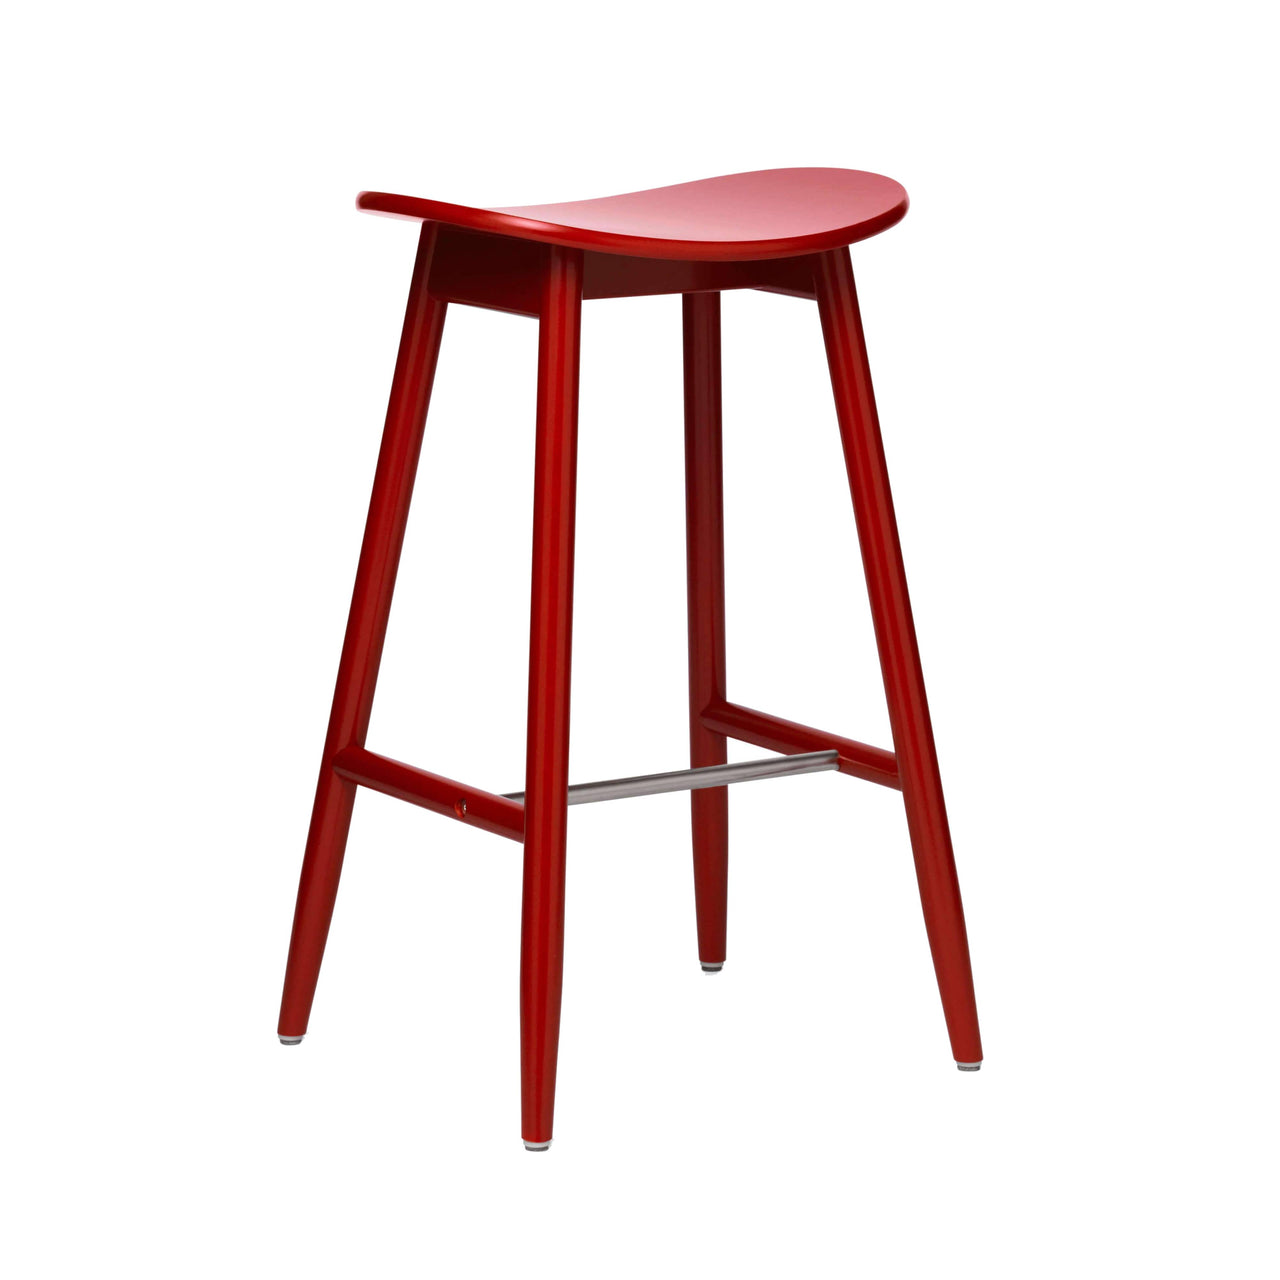 Icha Bar + Counter Stool: Counter + Red Lacquered Beech